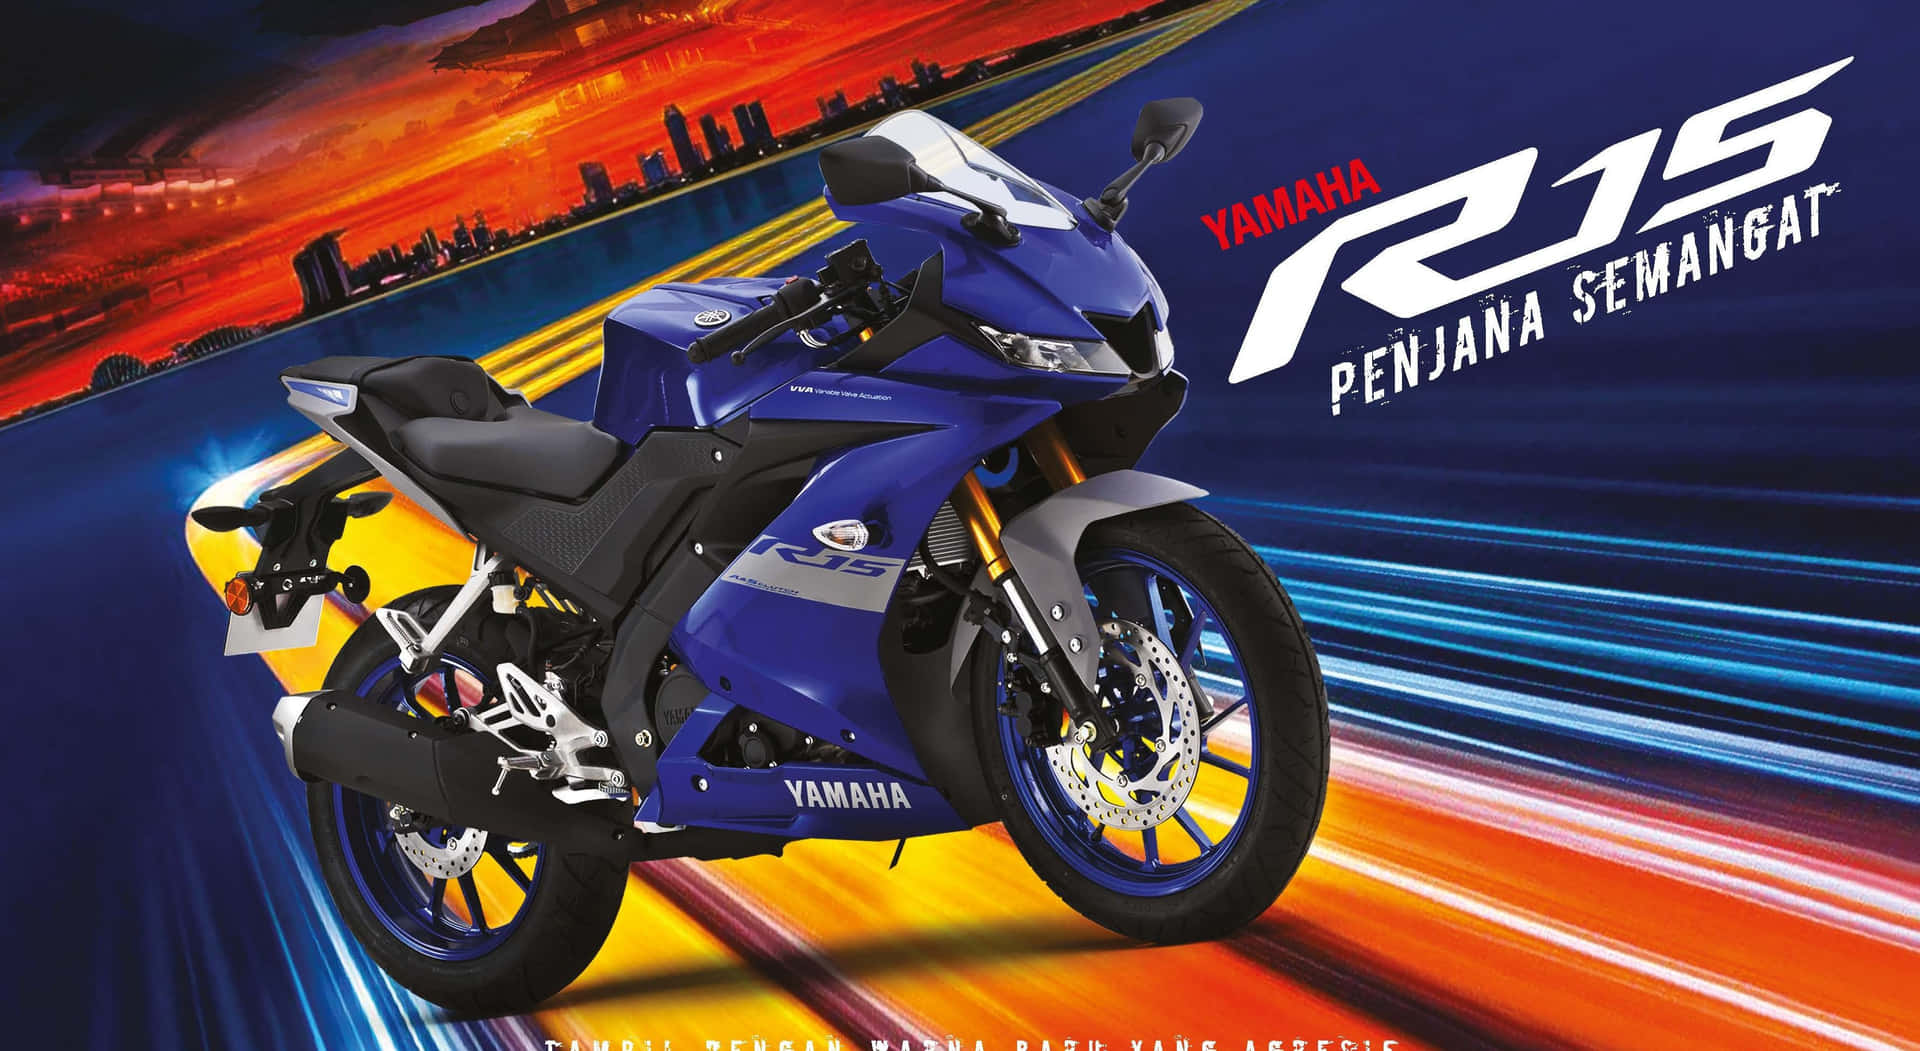 Yamaha R15 - A Blue Motorcycle Driving Down The Road